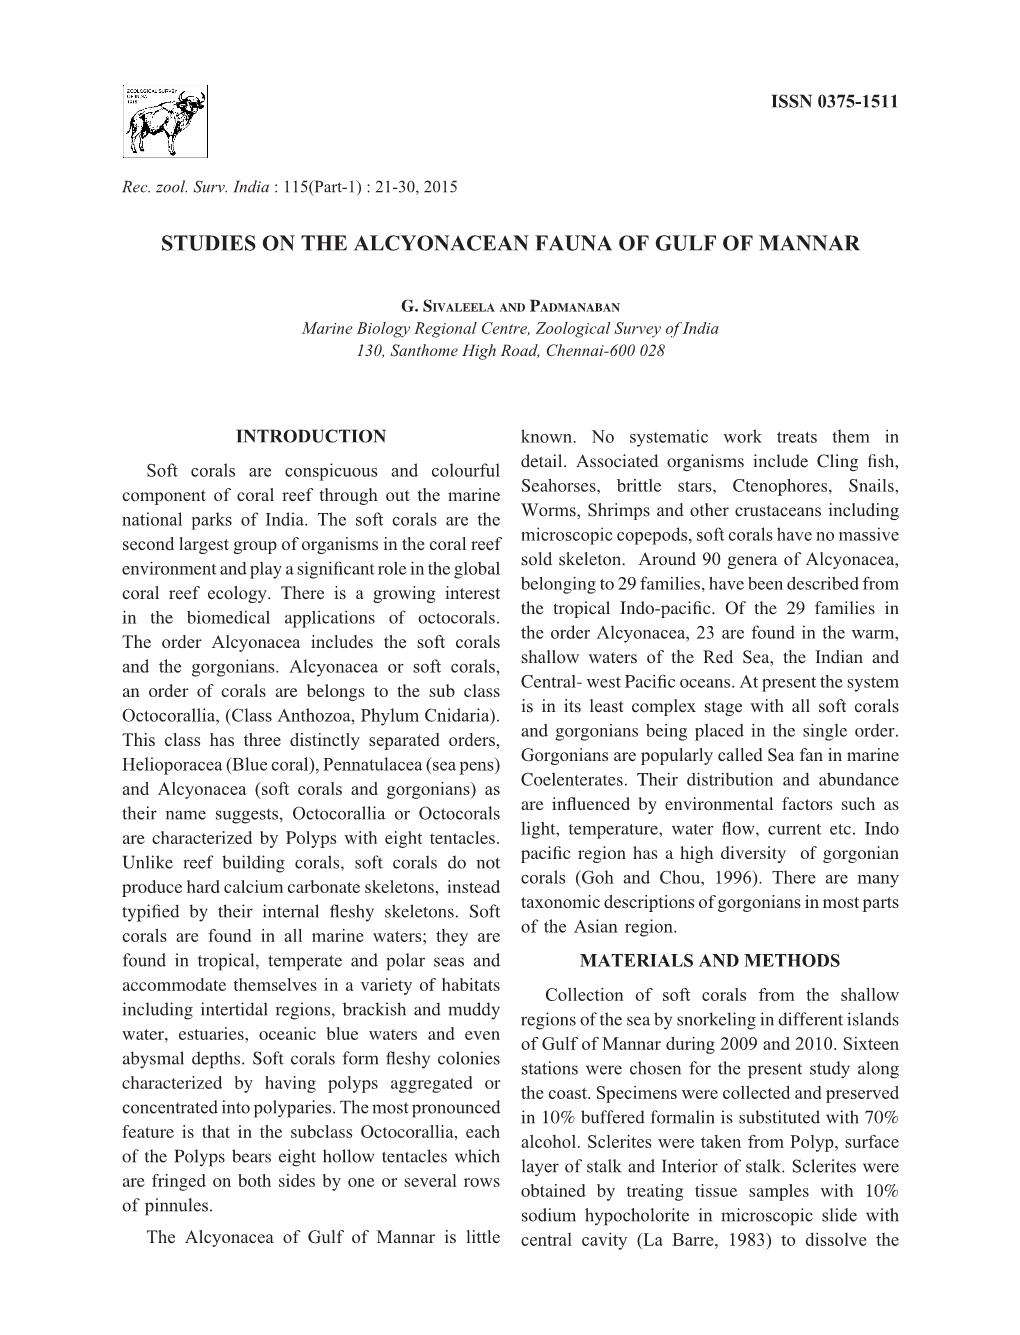 Studies on the Alcyonacean Fauna of Gulf of Mannar 21 ISSN 0375-1511